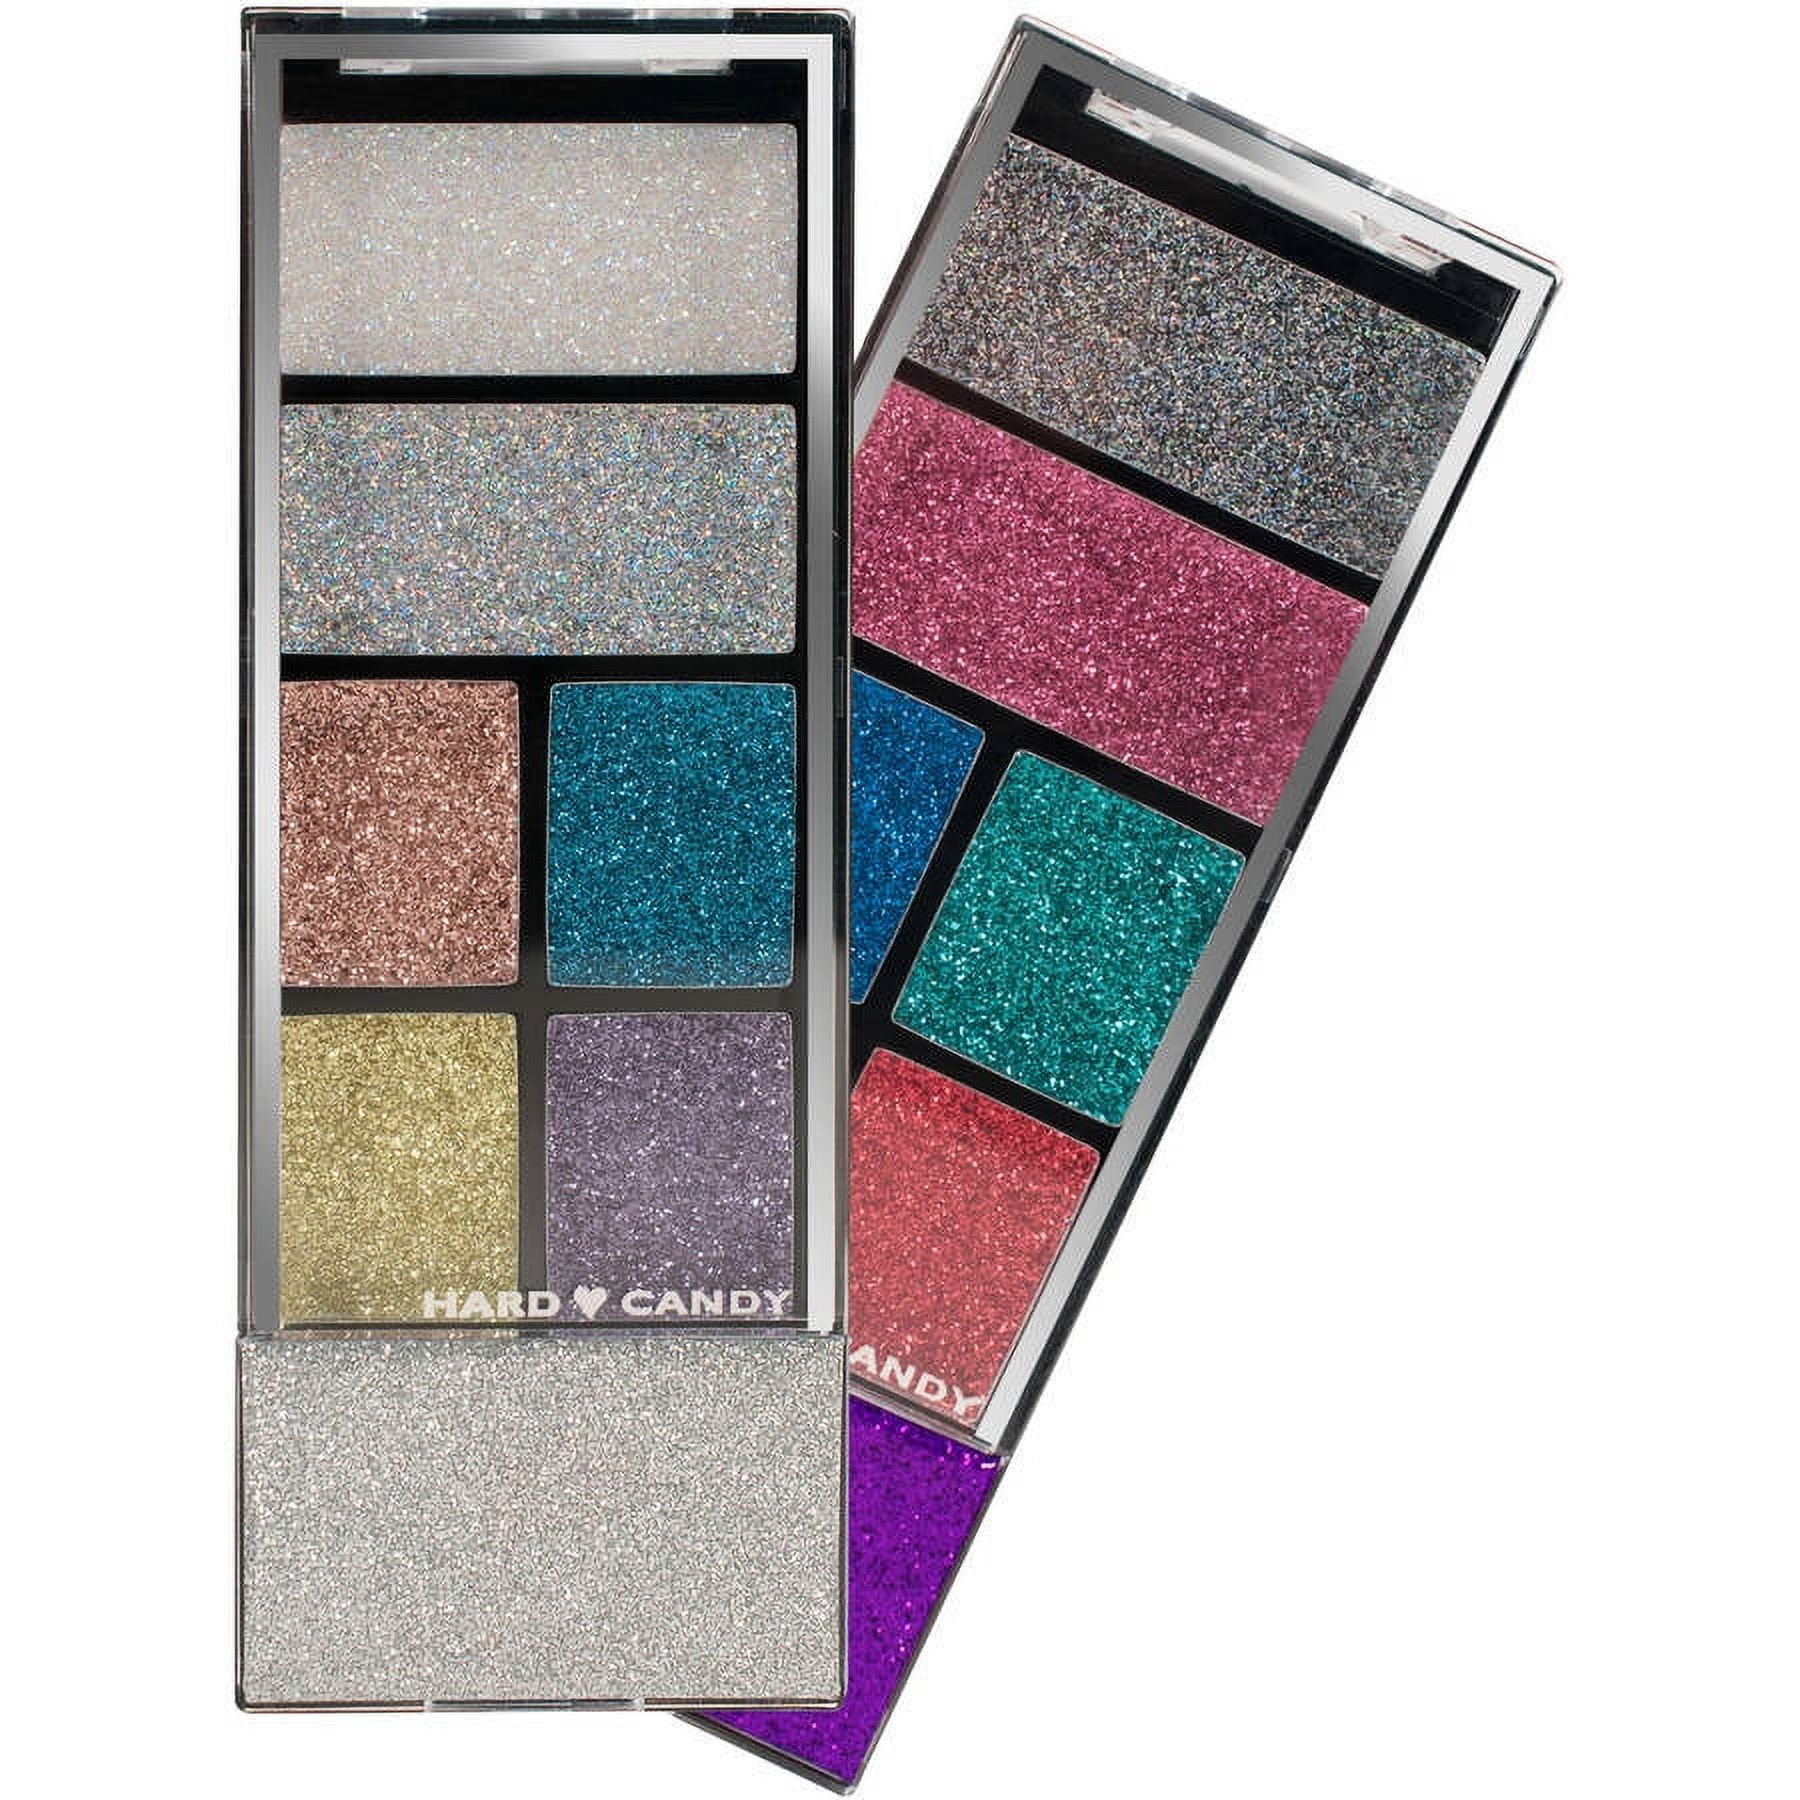 Hard Candy Glitteratzi Compact Eye Shadow, Call Me Sparkles, 5.63 oz - image 3 of 3